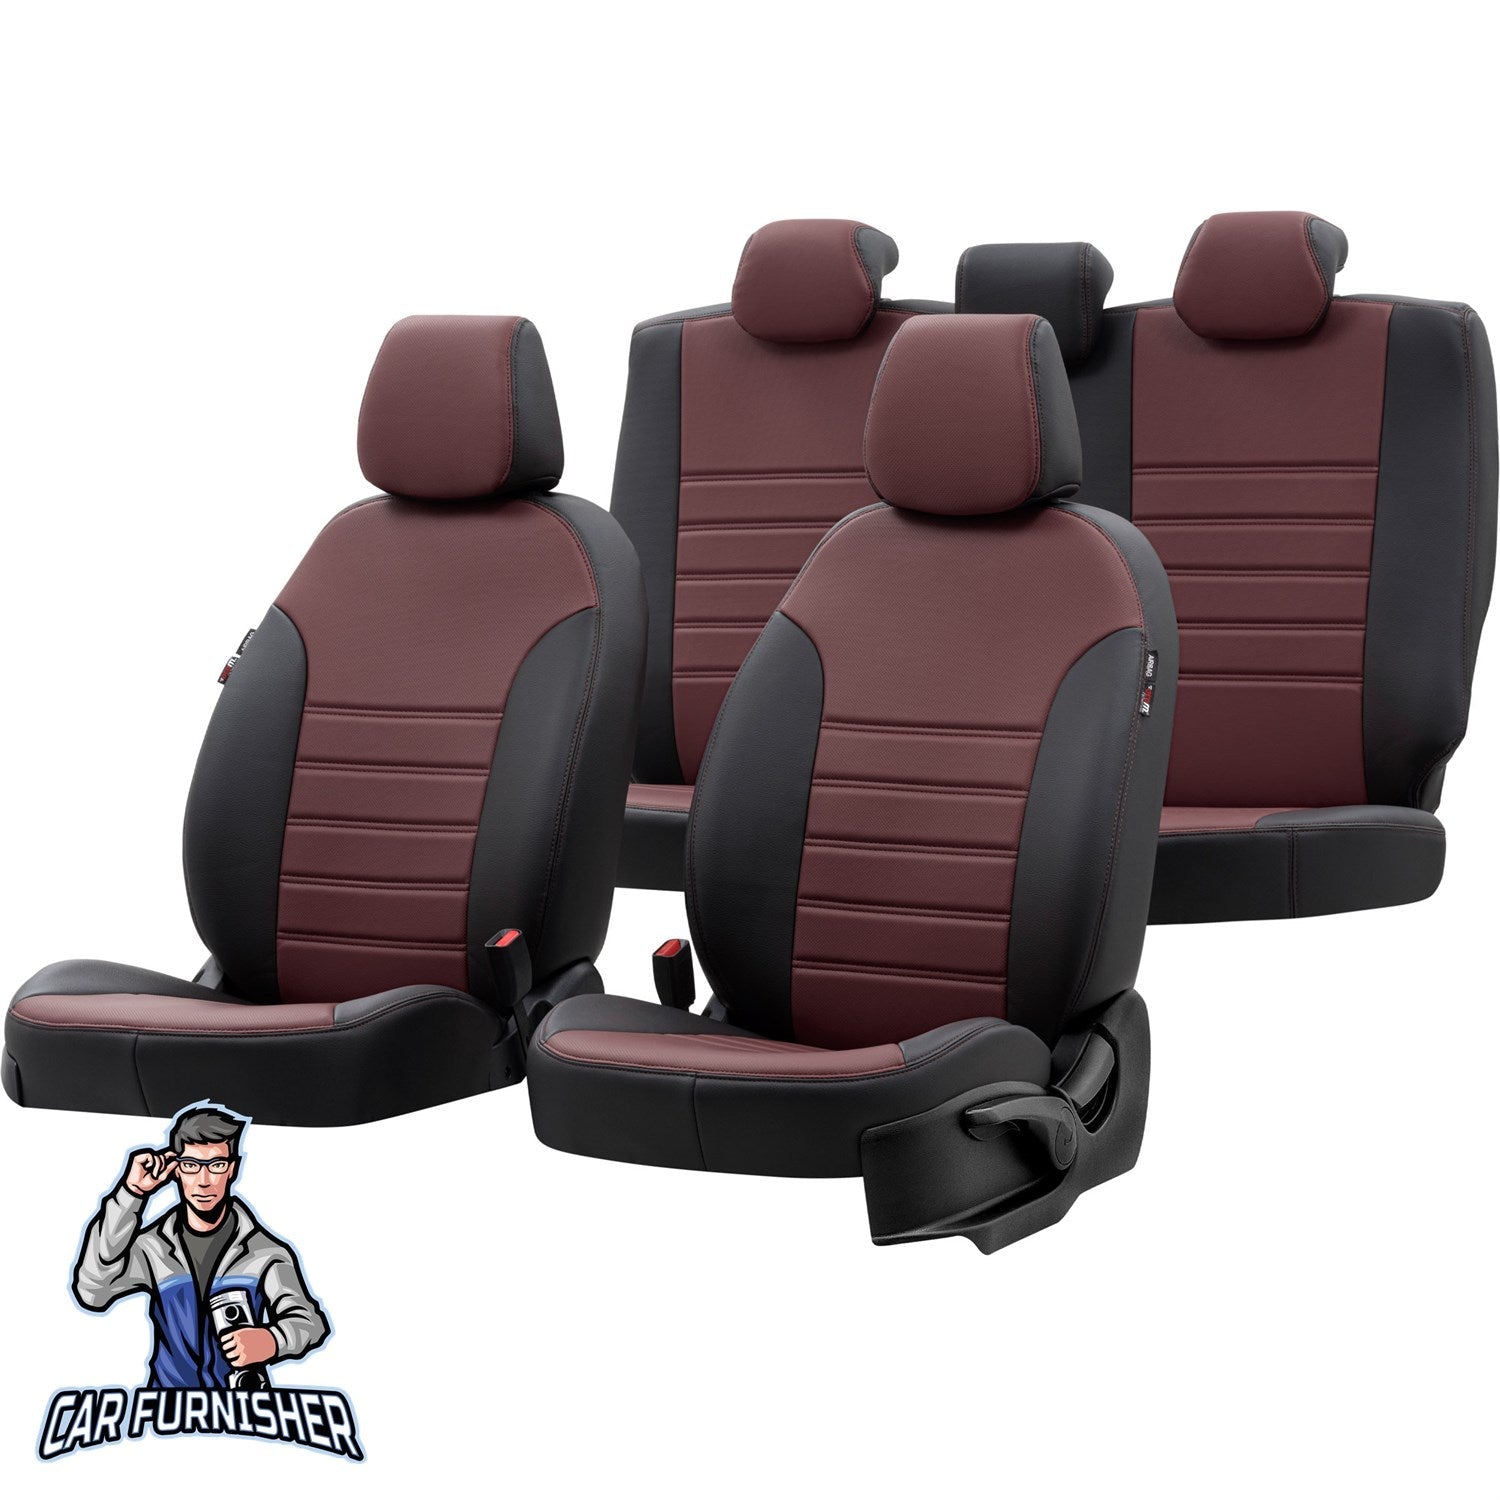 Mitsubishi Outlander Seat Covers Istanbul Leather Design Burgundy Leather